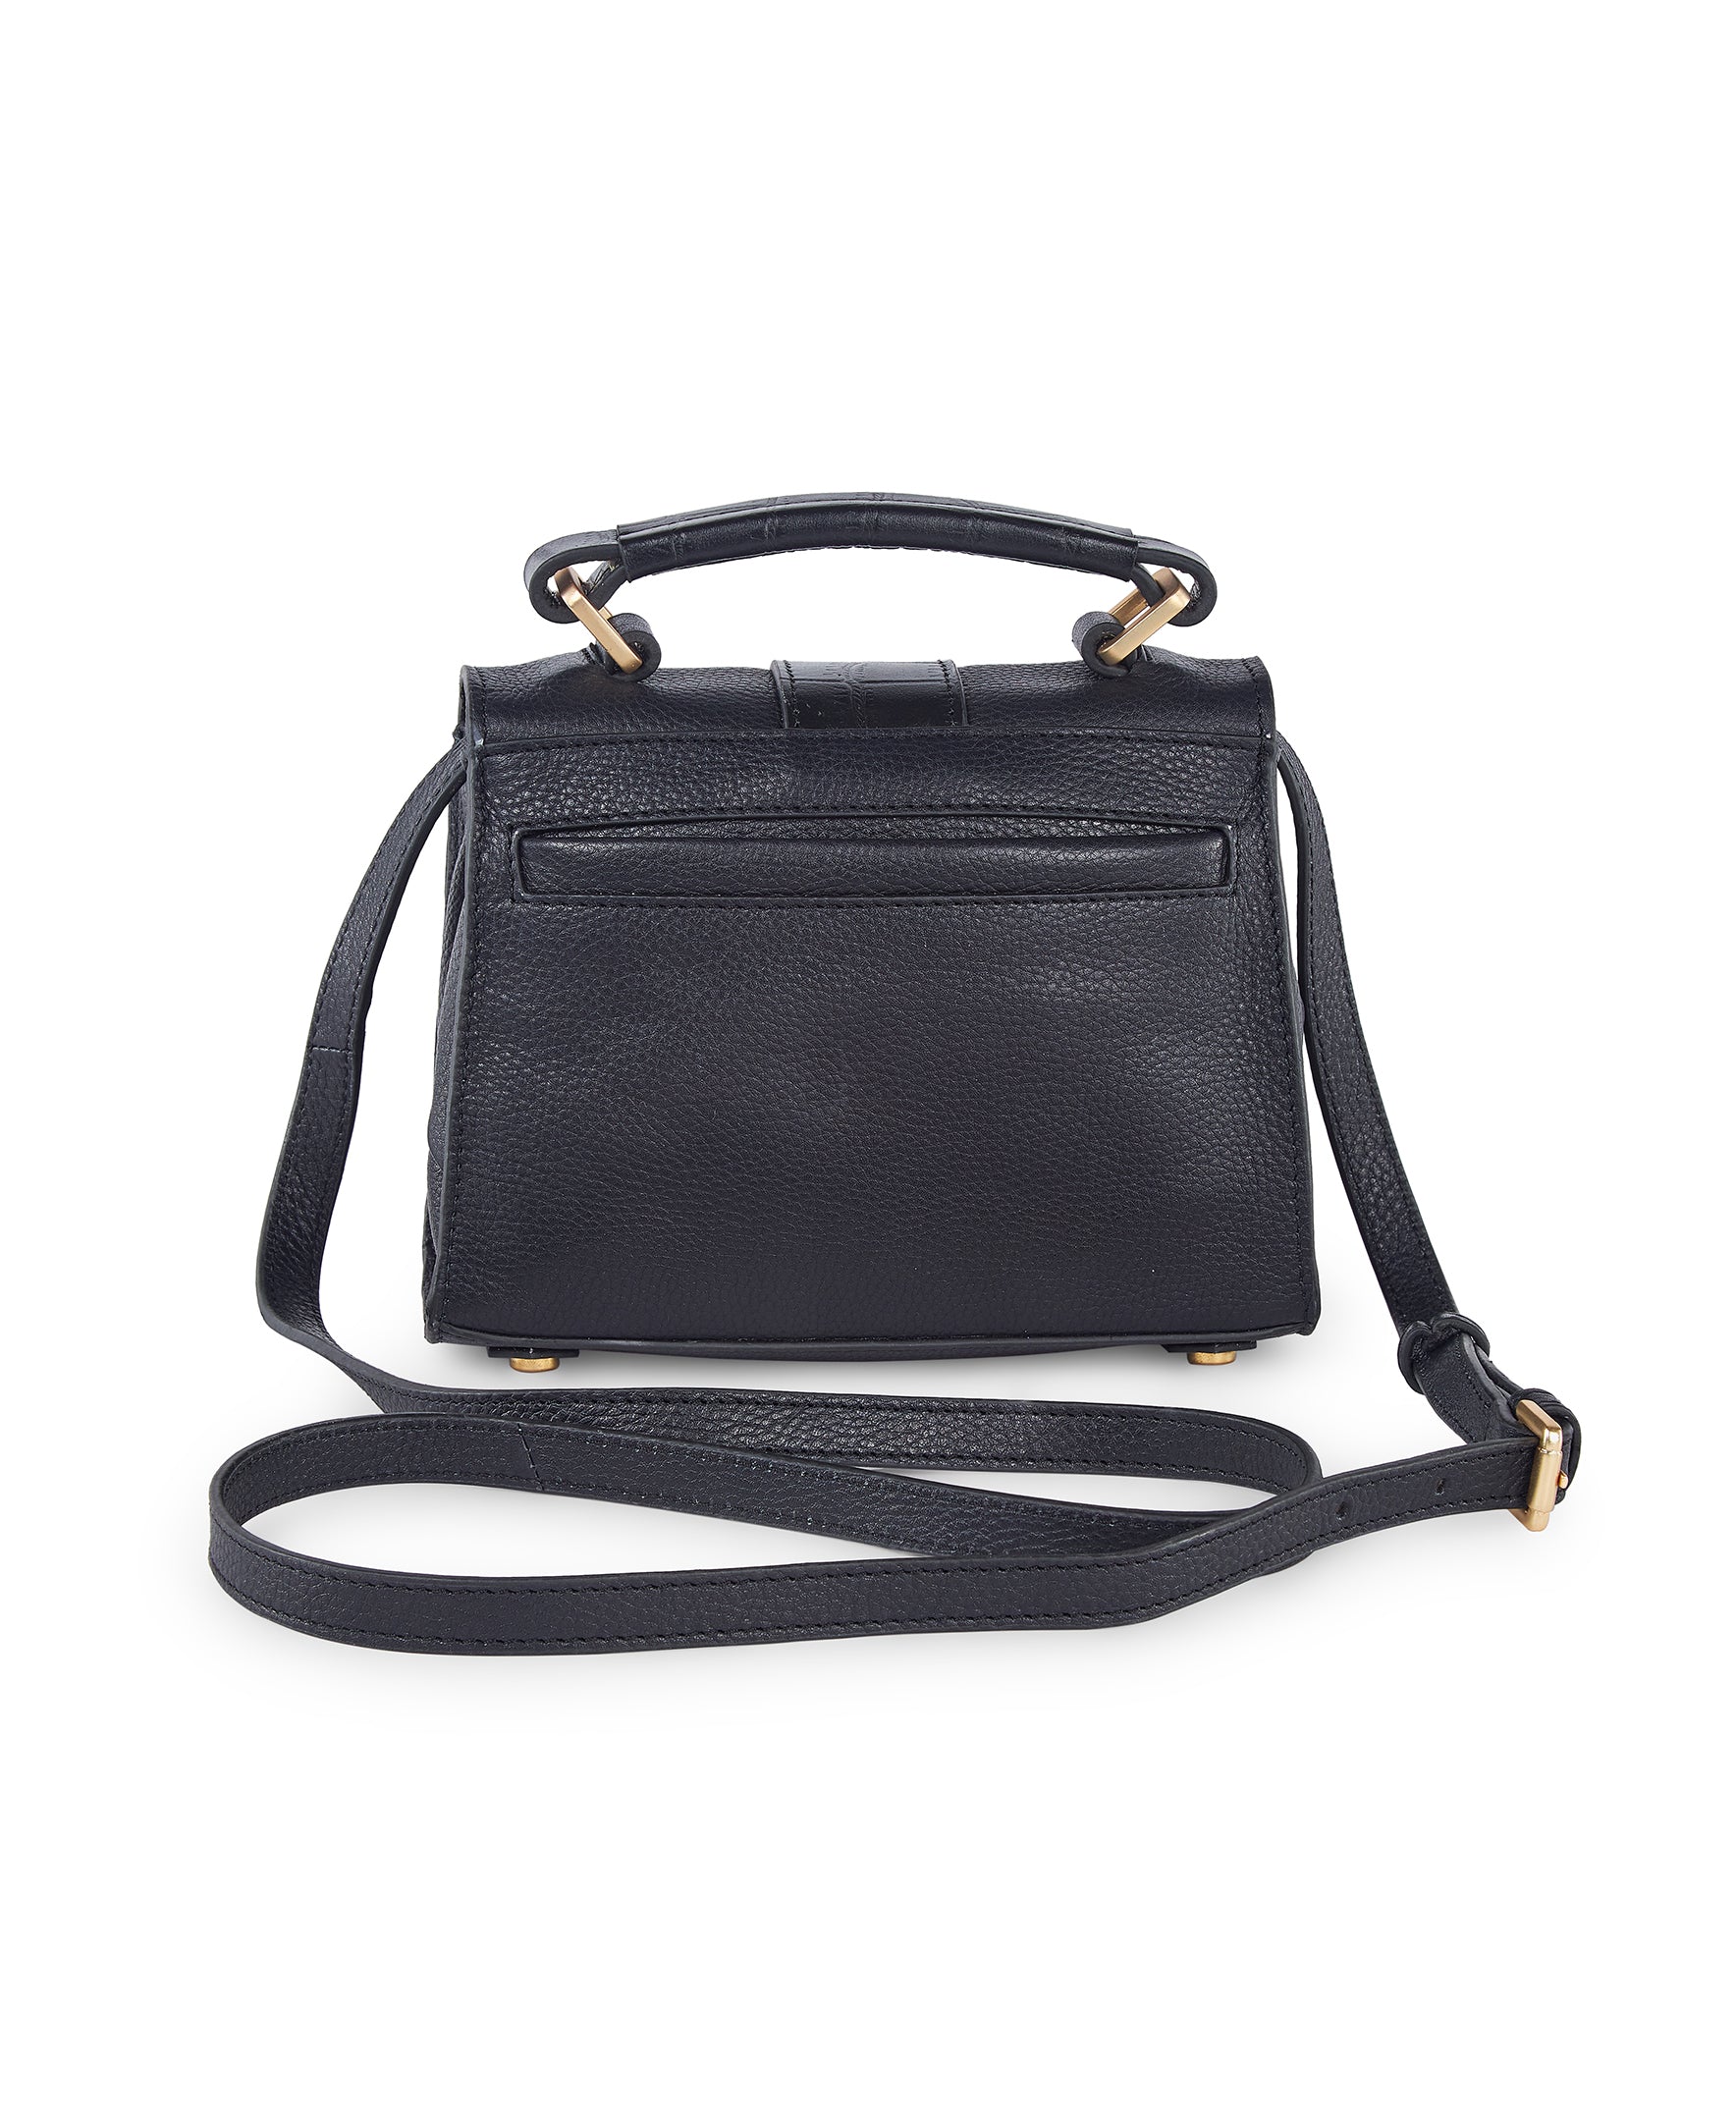 Versatile Crossbody: Transform Your Style with lodis